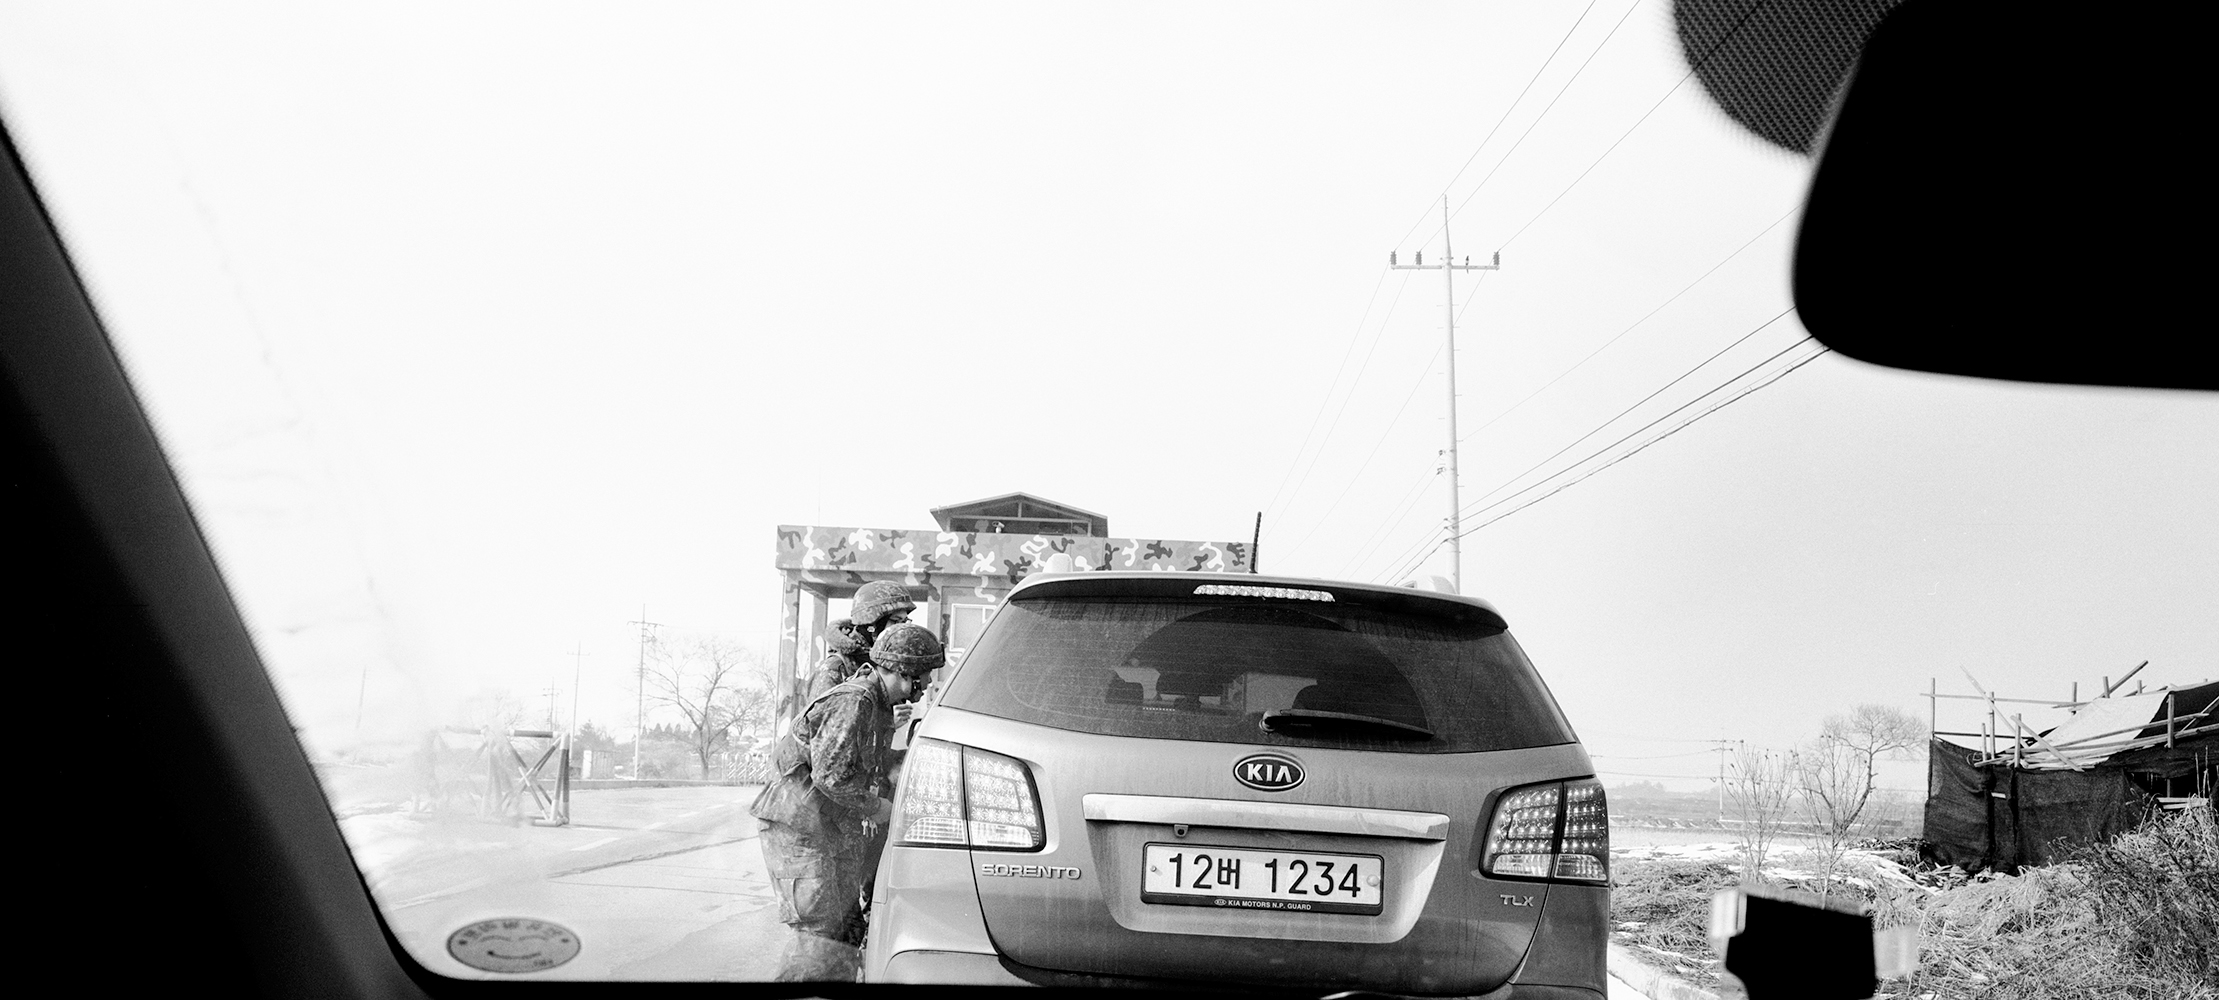  Jinhyun Cha,  Car entering restricted area for civilians,  2014 